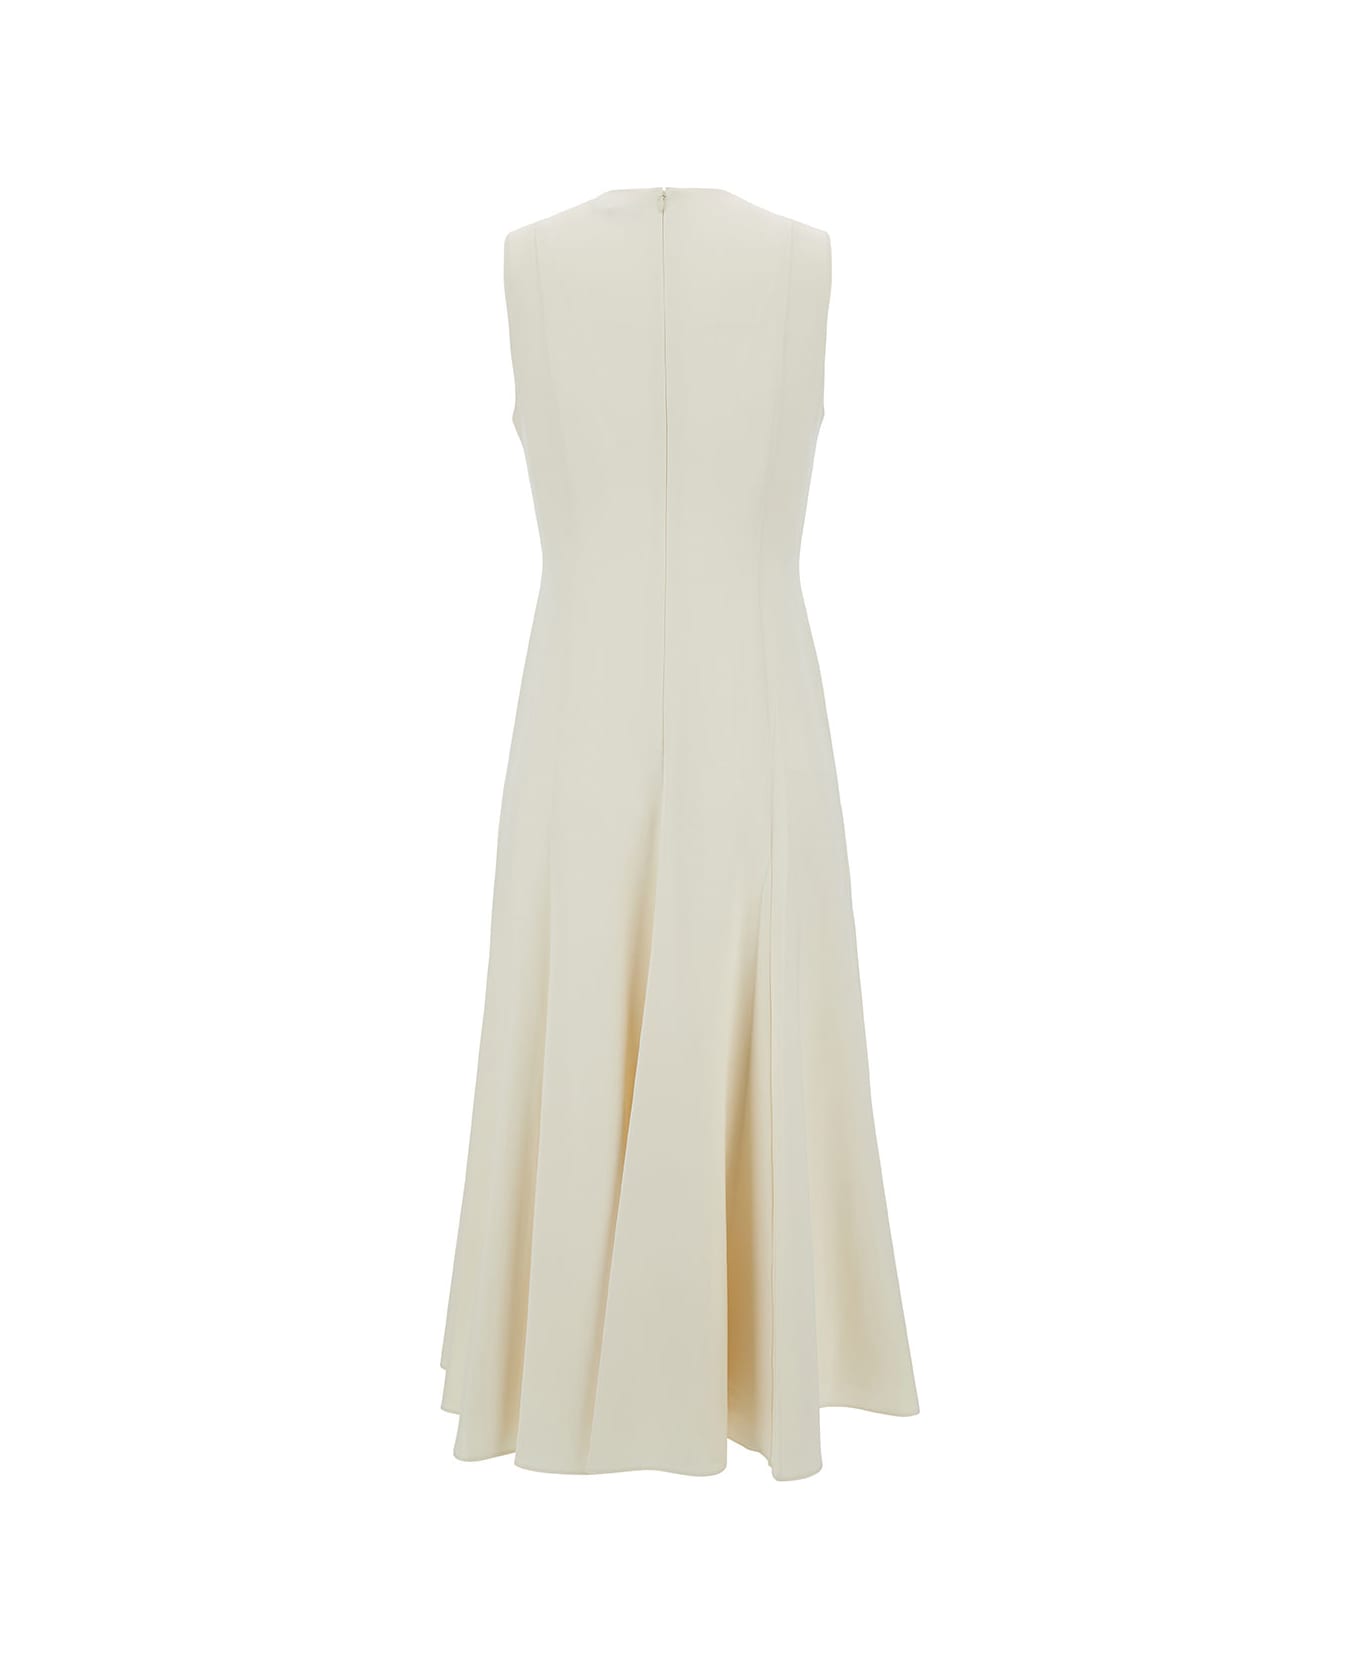 Theory Midi White Sleeveless Dress With Pleated Skirt In Triacetate Blend Woman - White